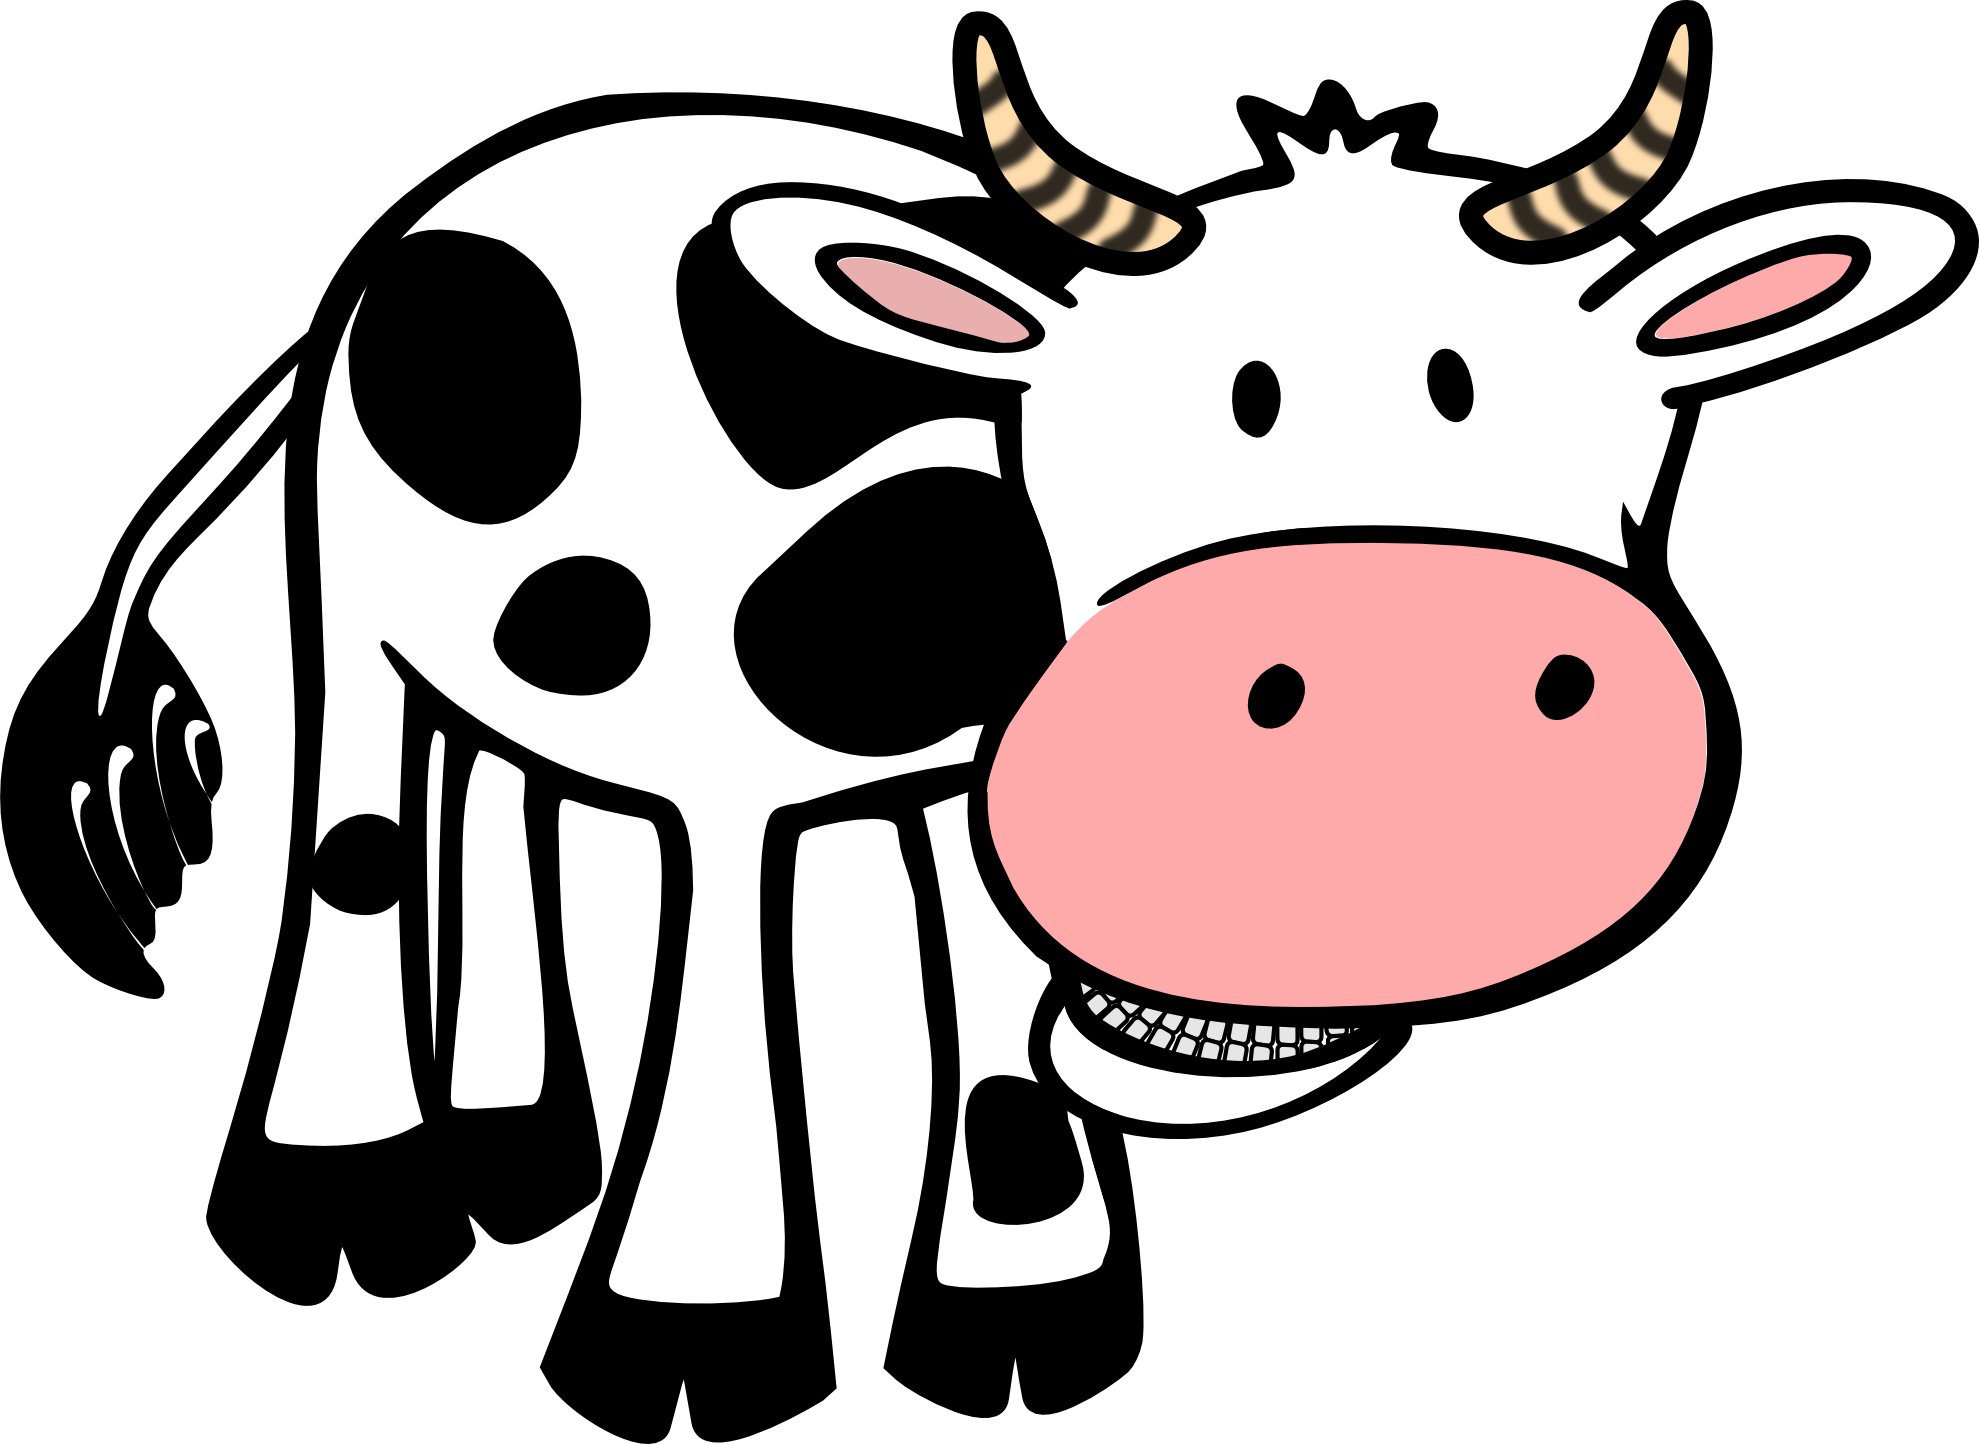 Cow Clipart Black And White | Clipart Panda - Free Clipart Images